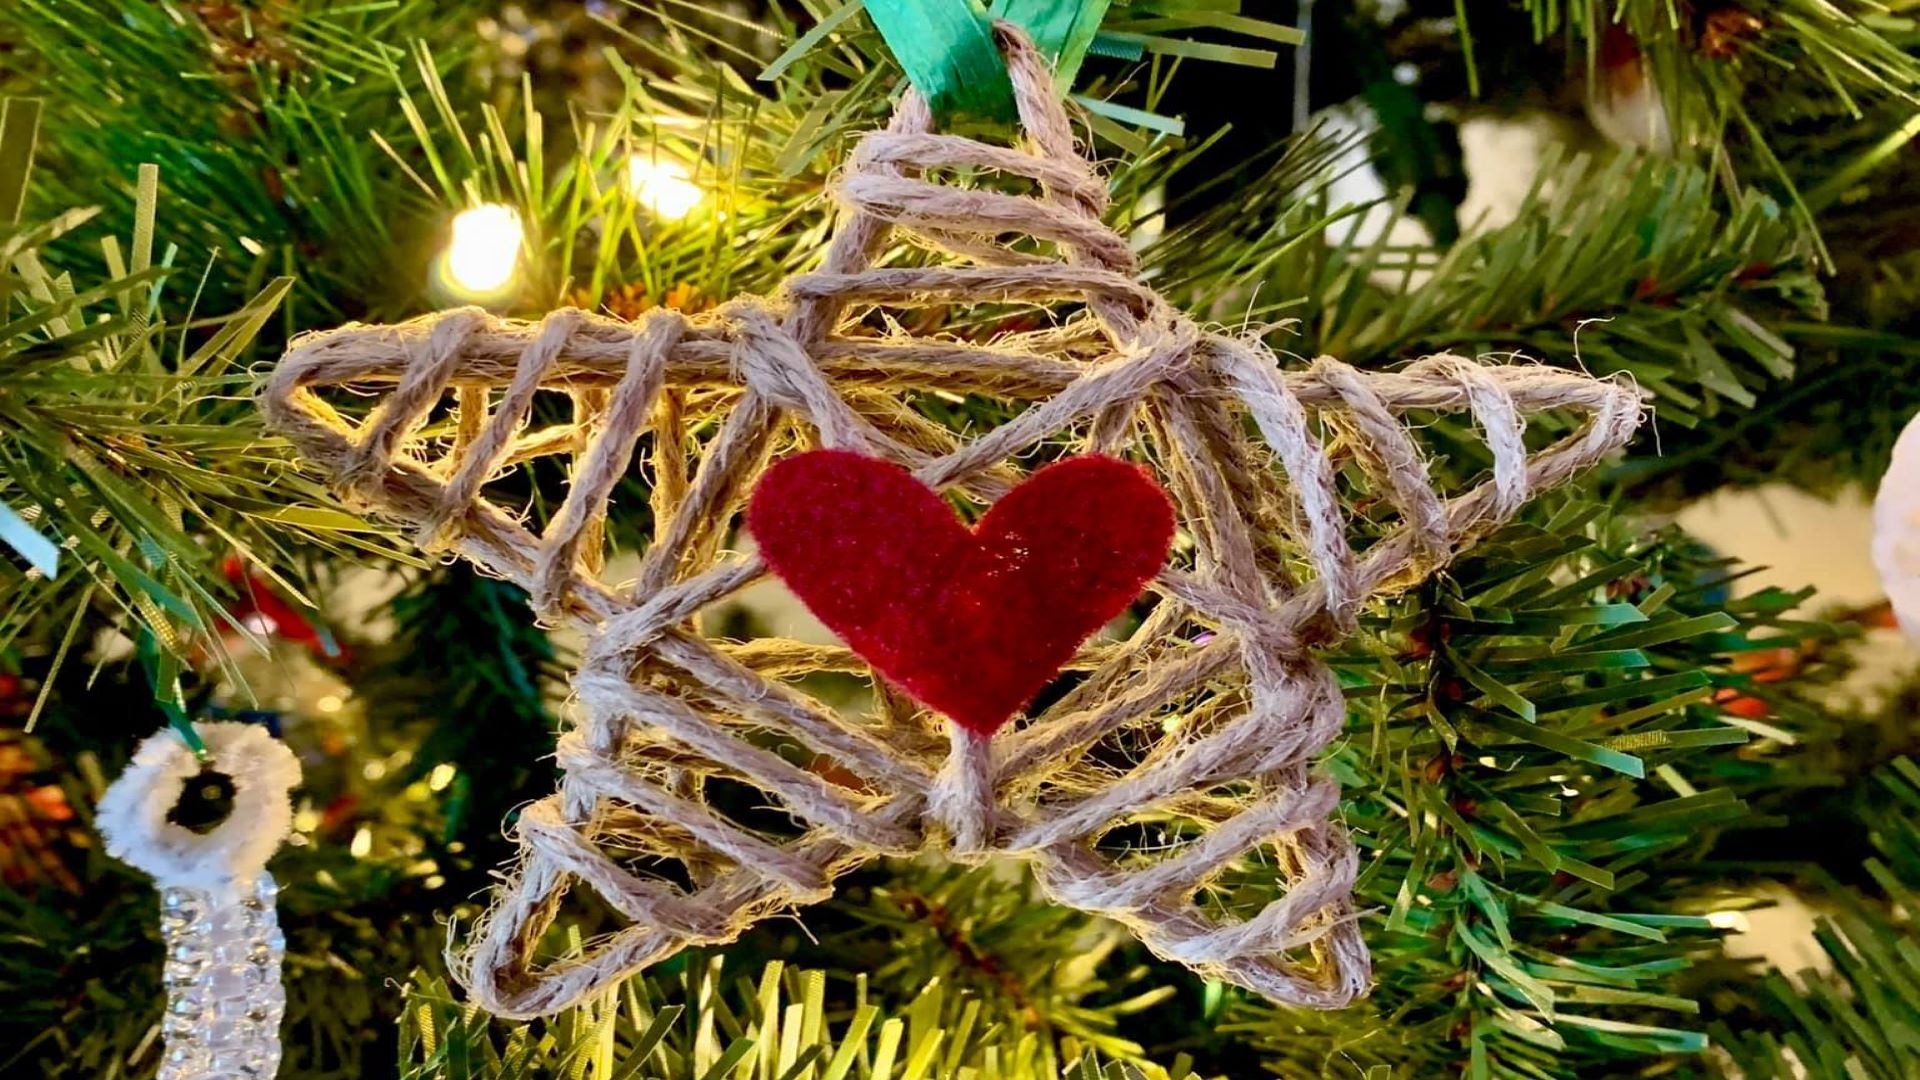 Star shaped Christmas ornament made of twine with a red heart in the center hanging on a Christmas tree.